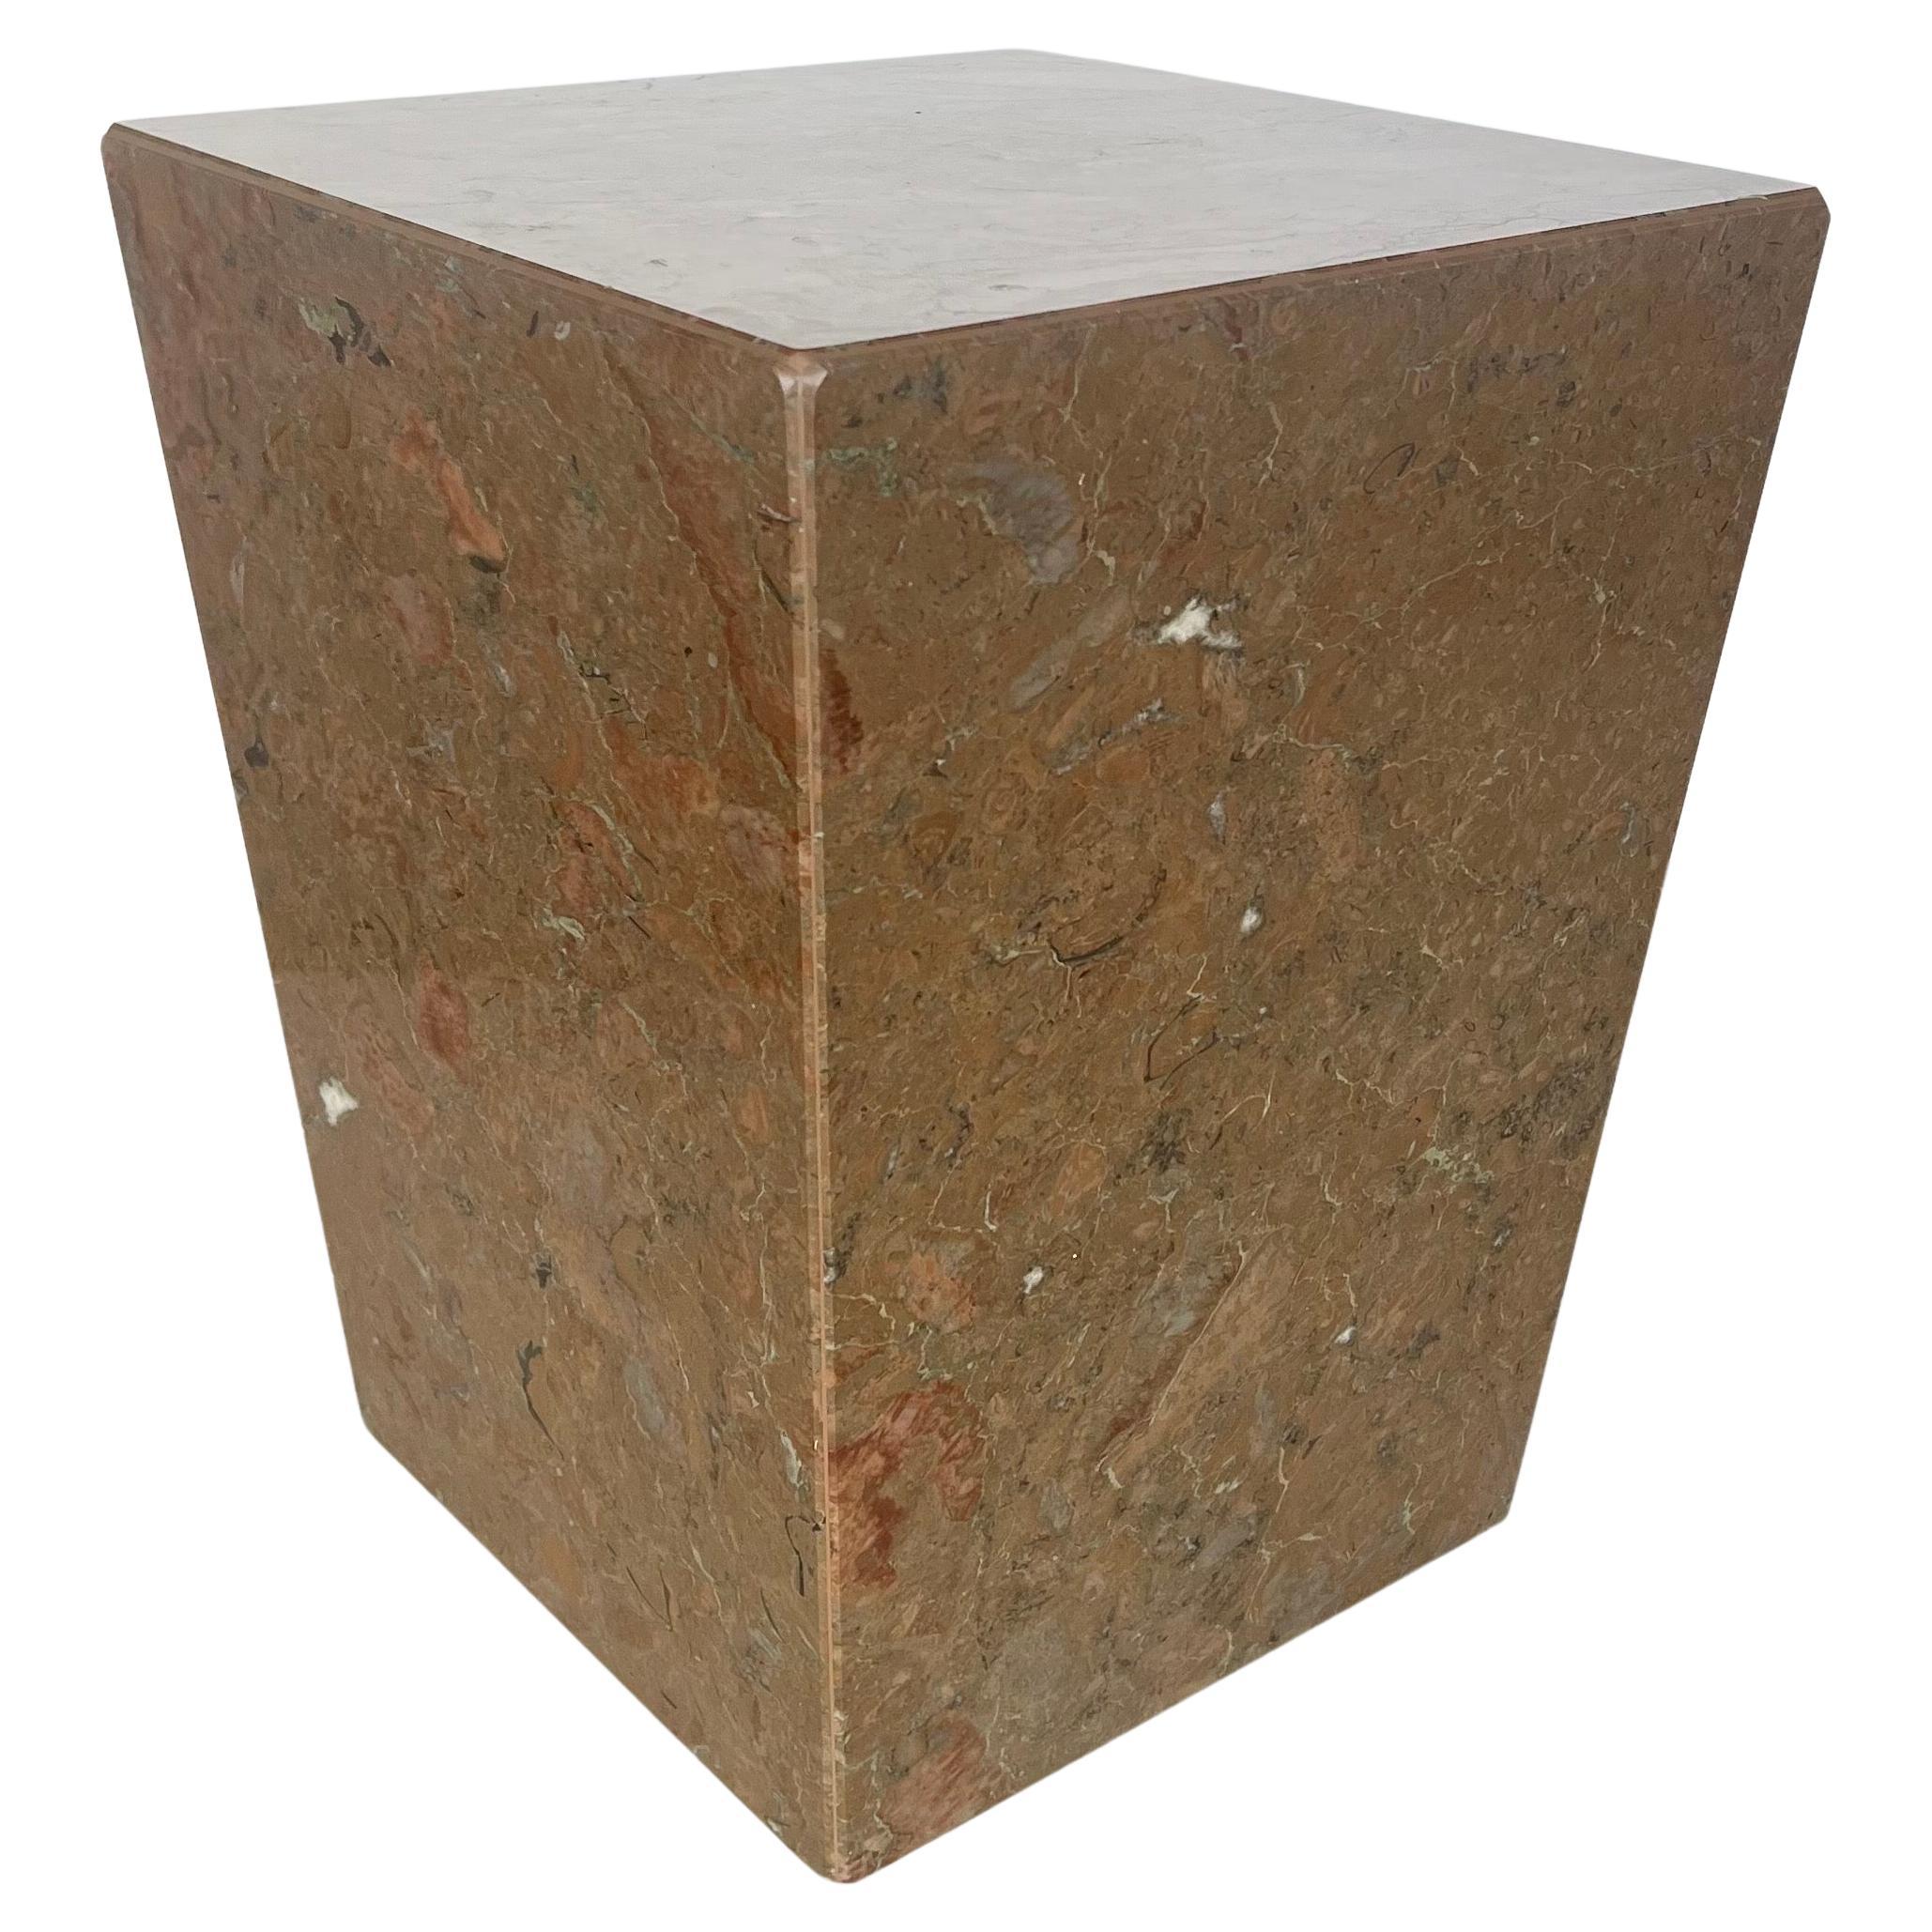 Postmodern Italian Marble Low Pedestal / End Table For Sale